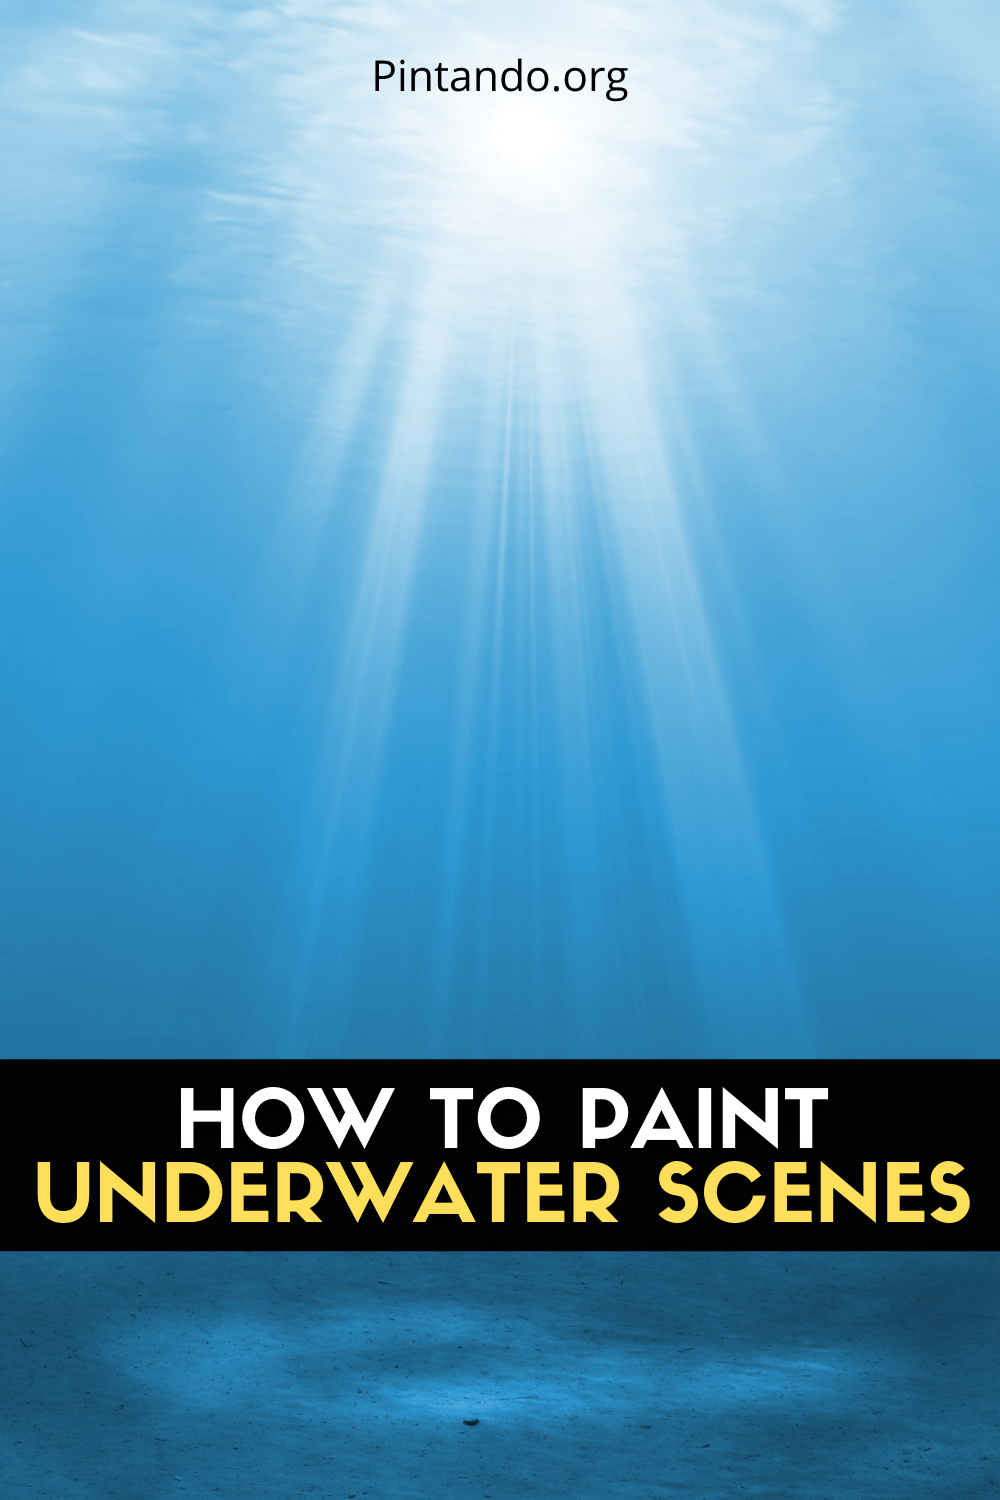 HOW TO PAINT UNDER WATER SCENES